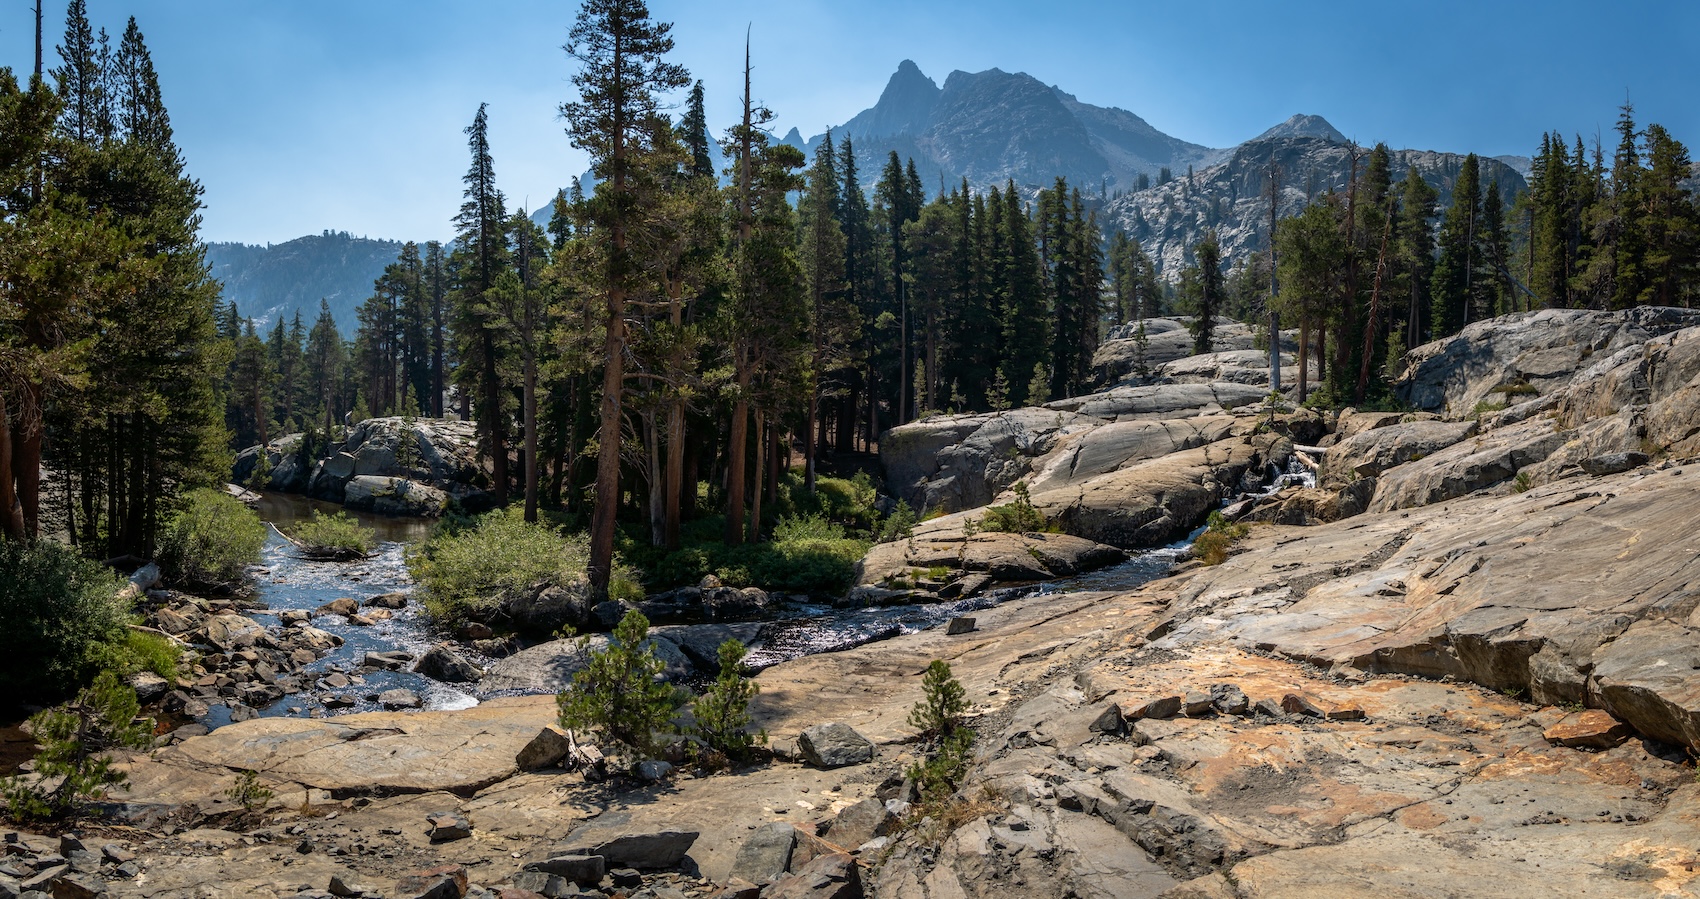 An alpine creek on the way down to Shadow Lake in the Sierra